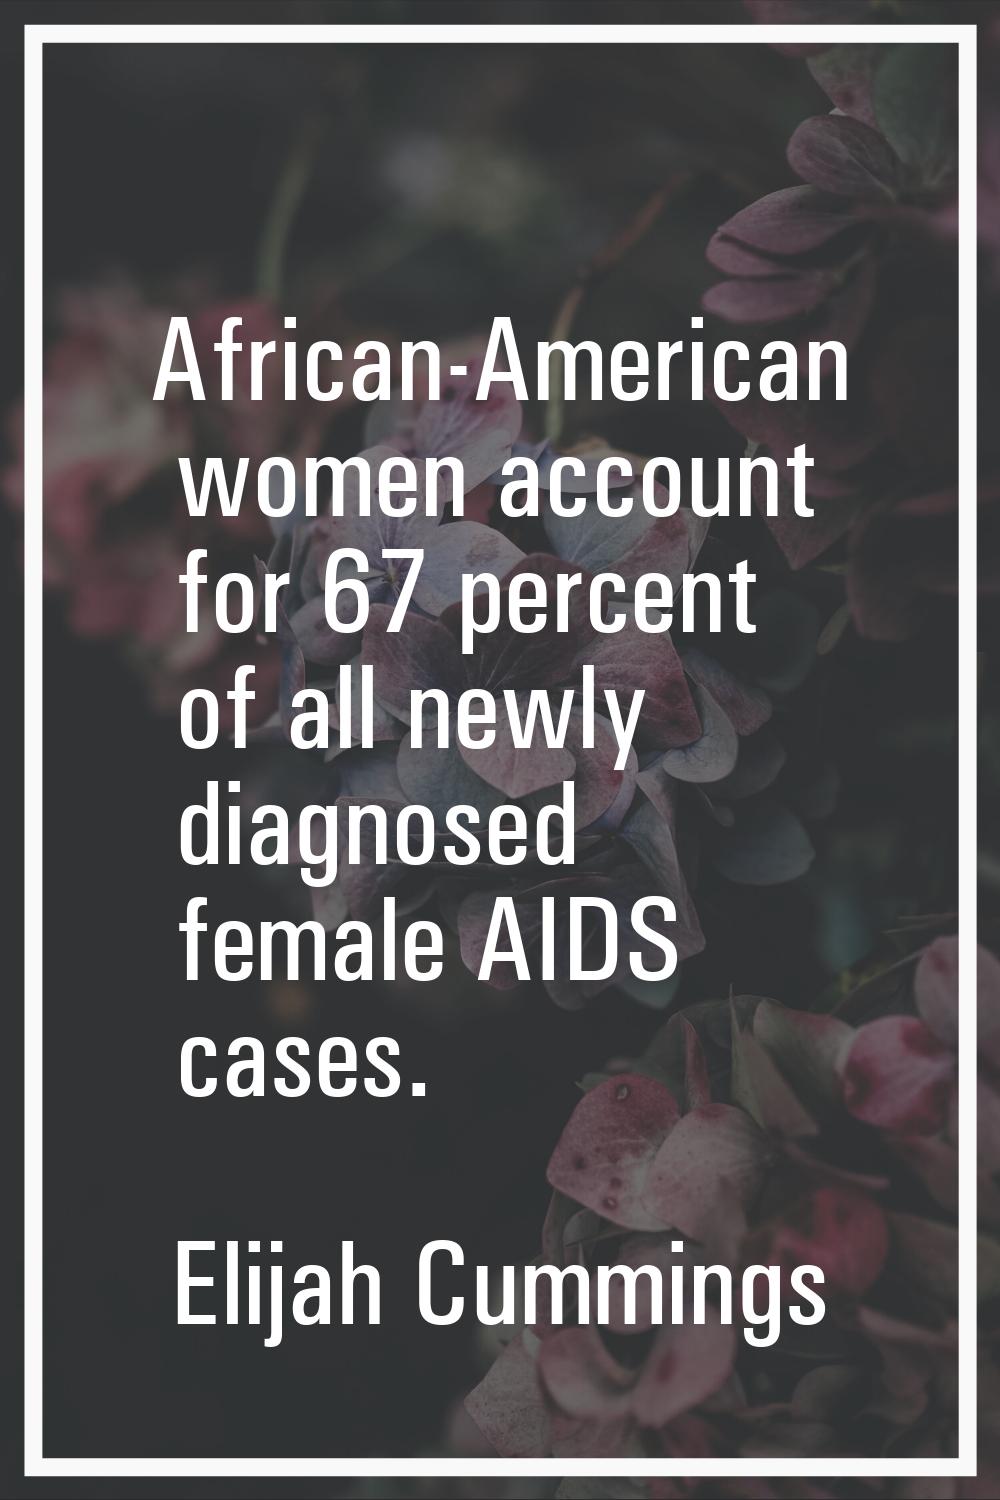 African-American women account for 67 percent of all newly diagnosed female AIDS cases.